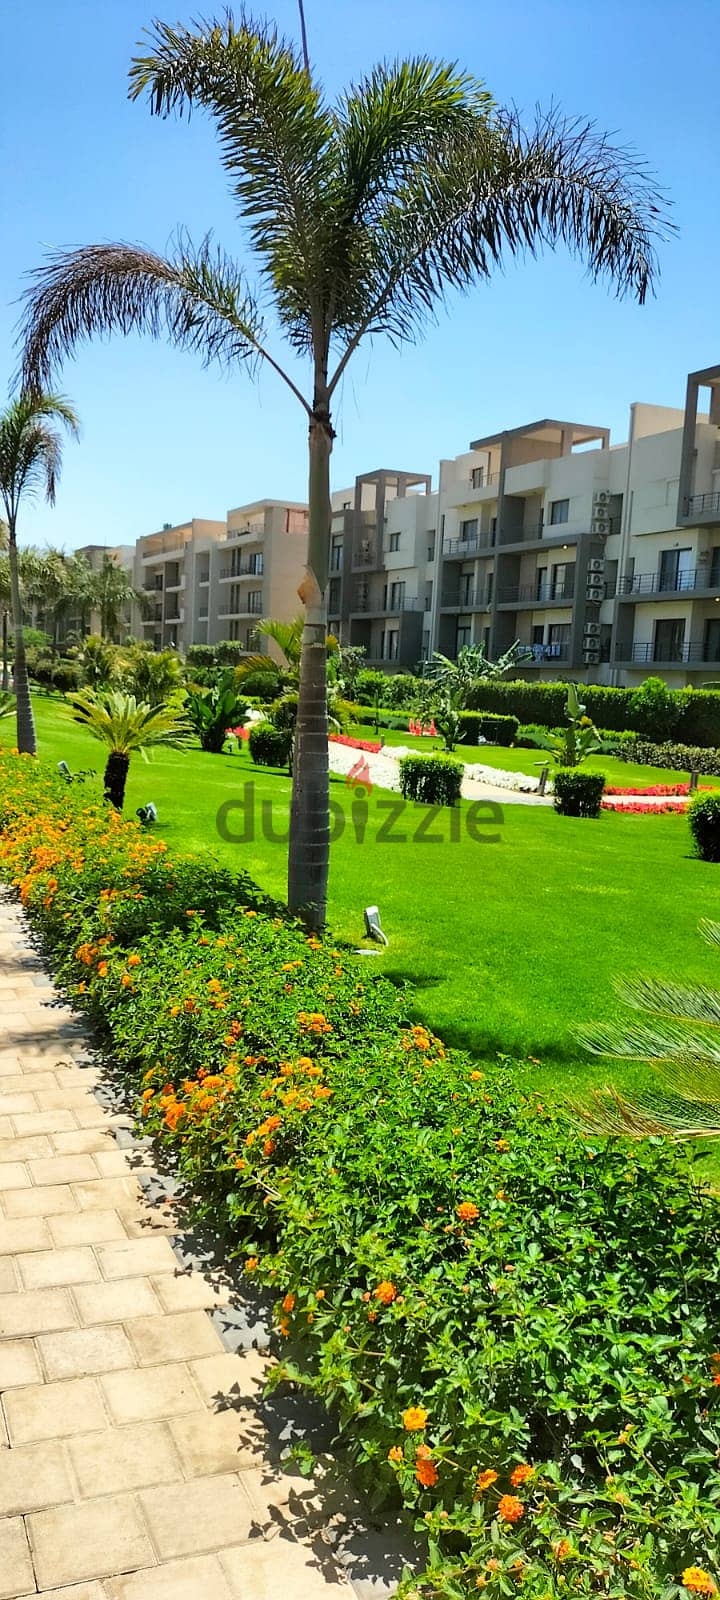 Apartment for sale with private garden with The kitchen and appliances are less than the market price, including maintenance,  ready to movewith 7